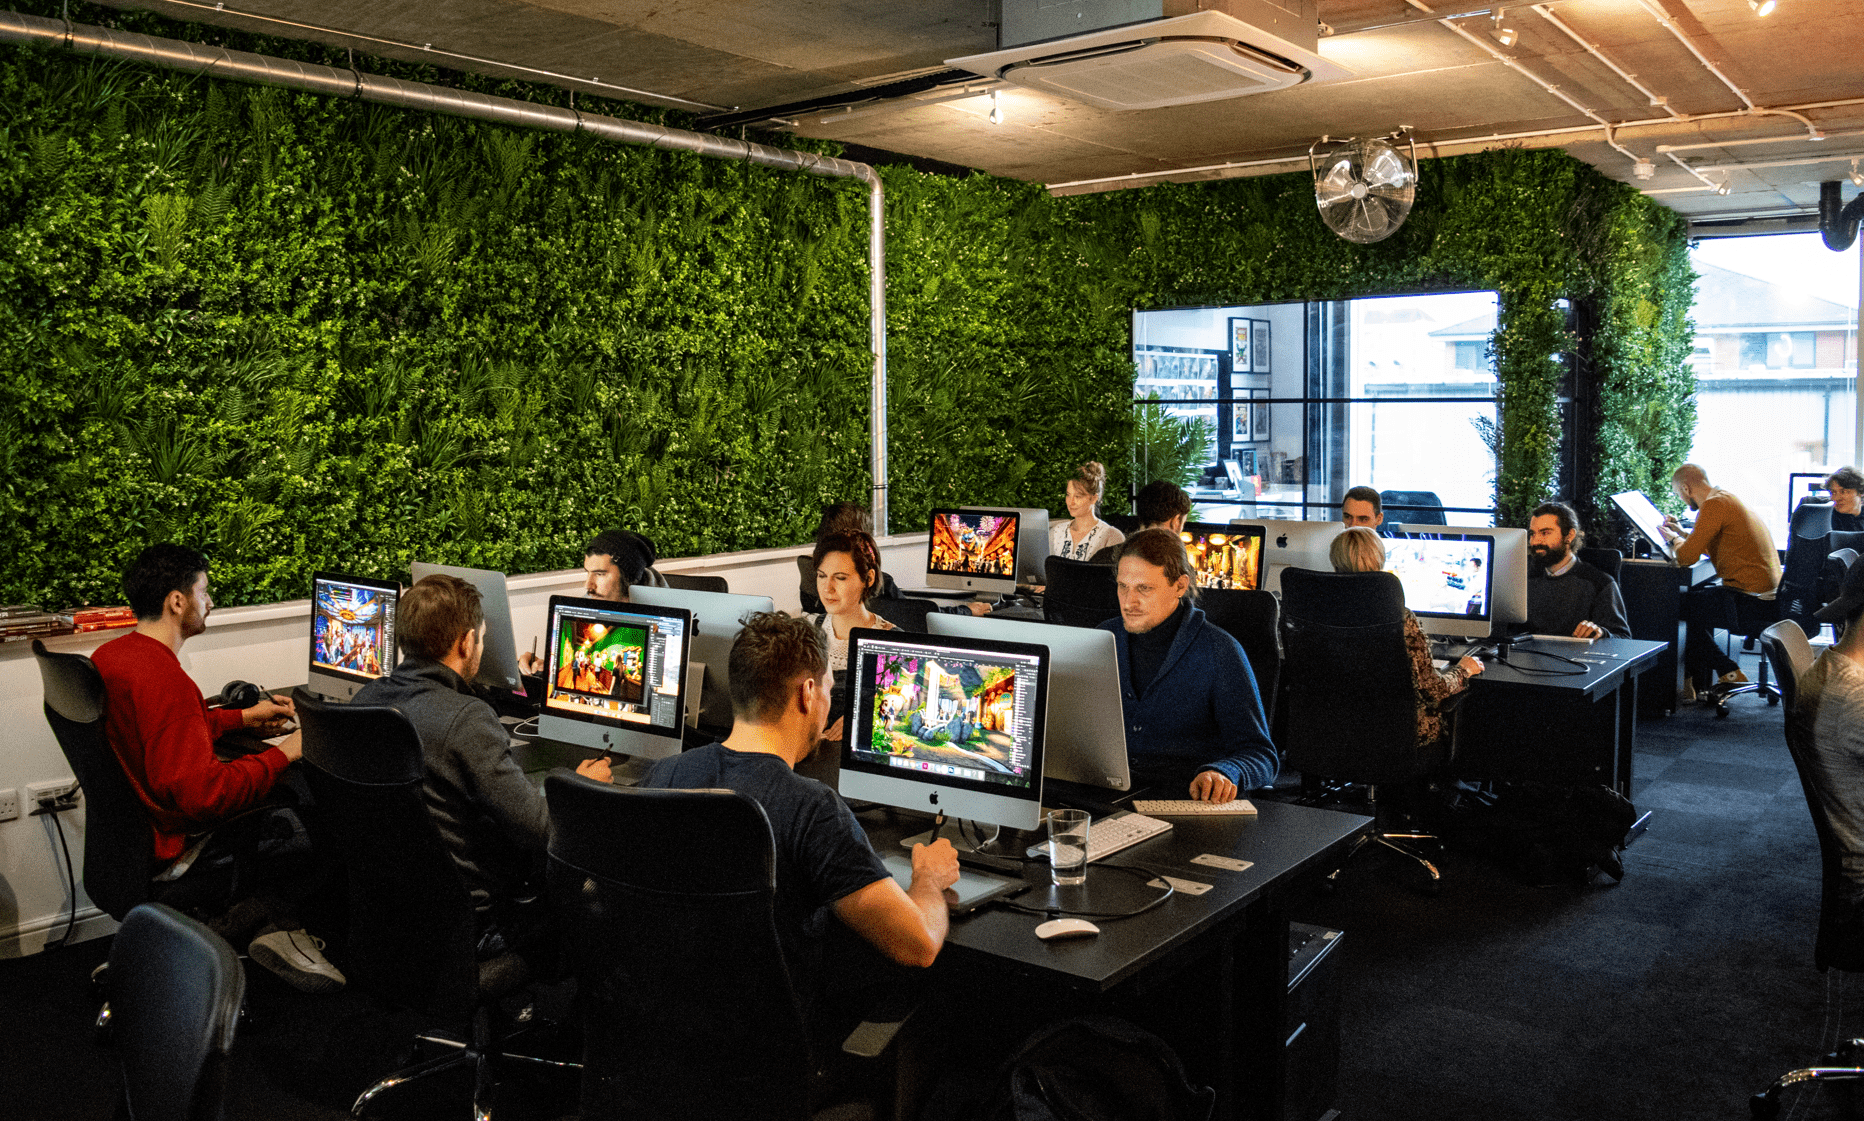 People in a office environment creating concept art next to a wall with grass on it